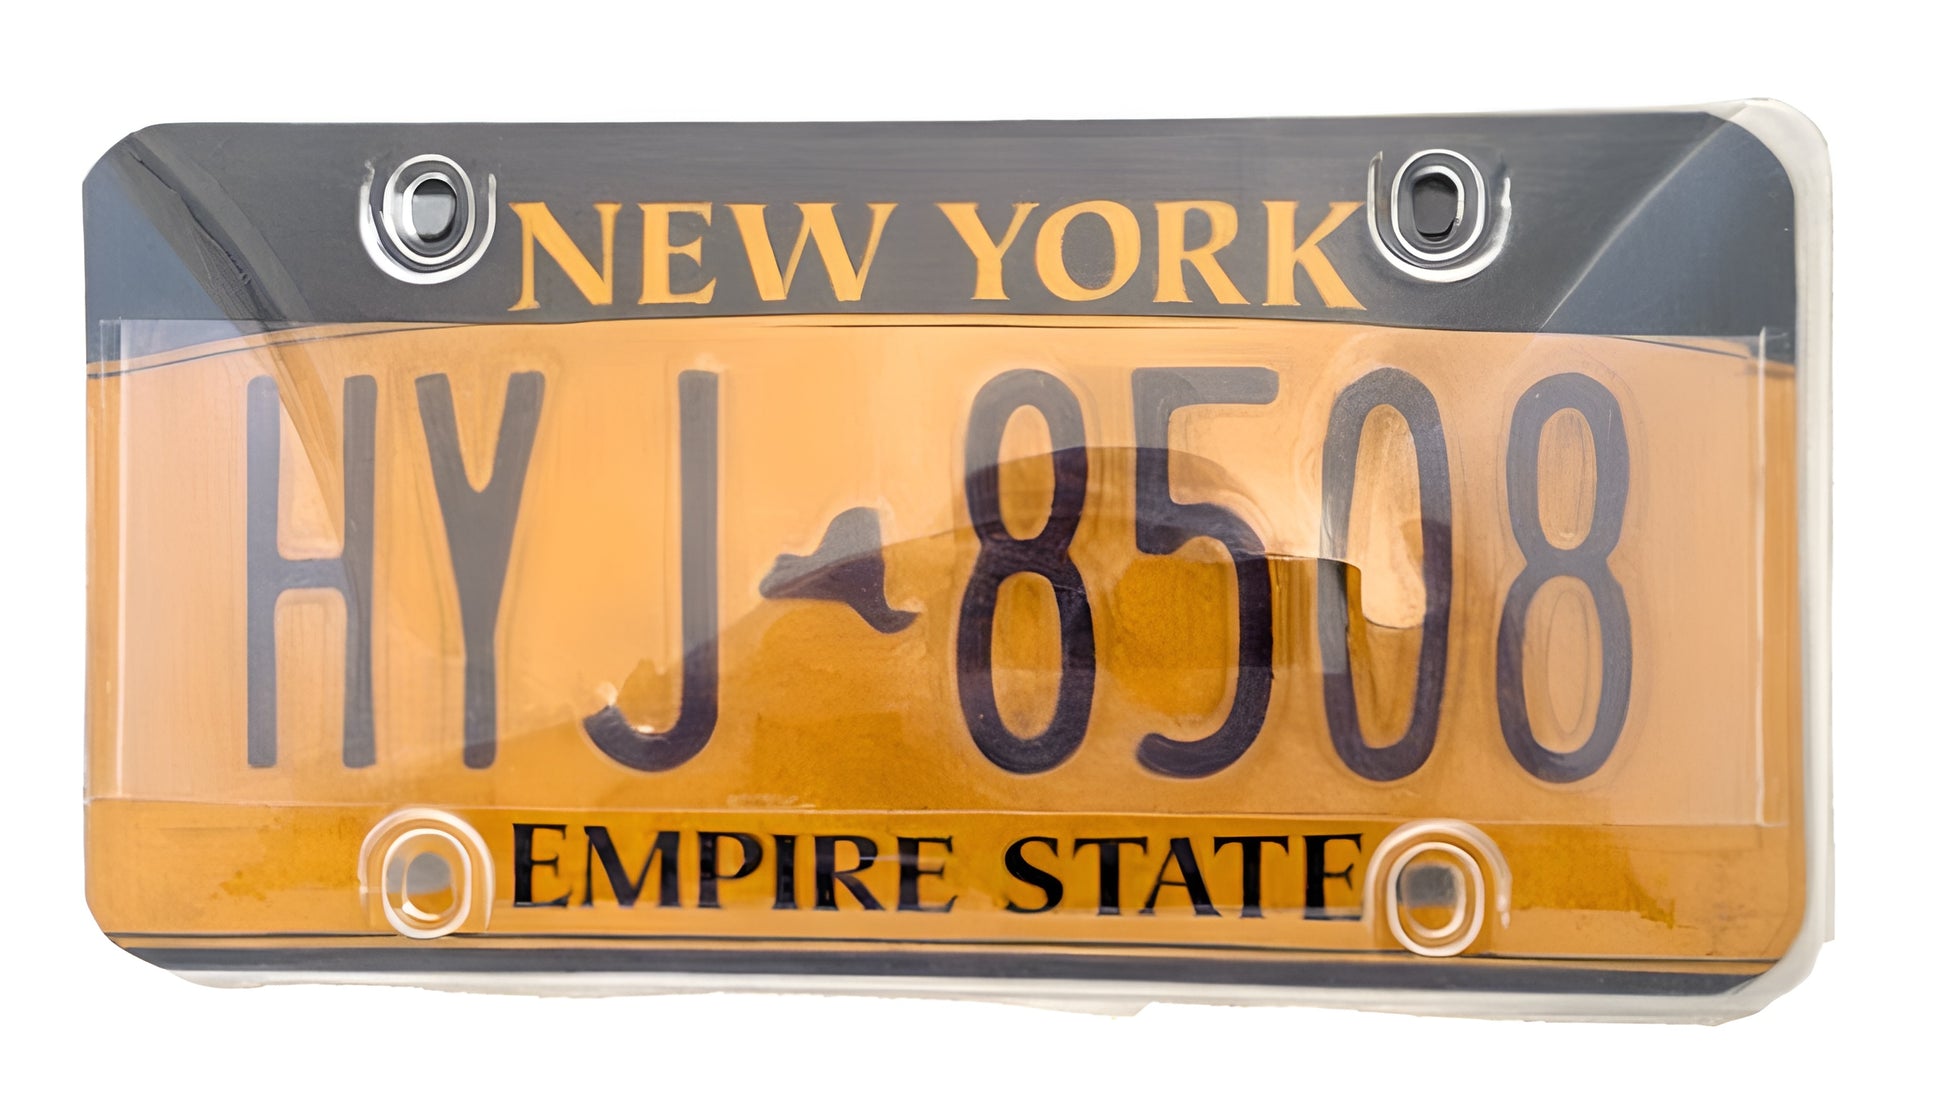 Clear License Plate Cover Photo Blocker Red Light Speed Cameras